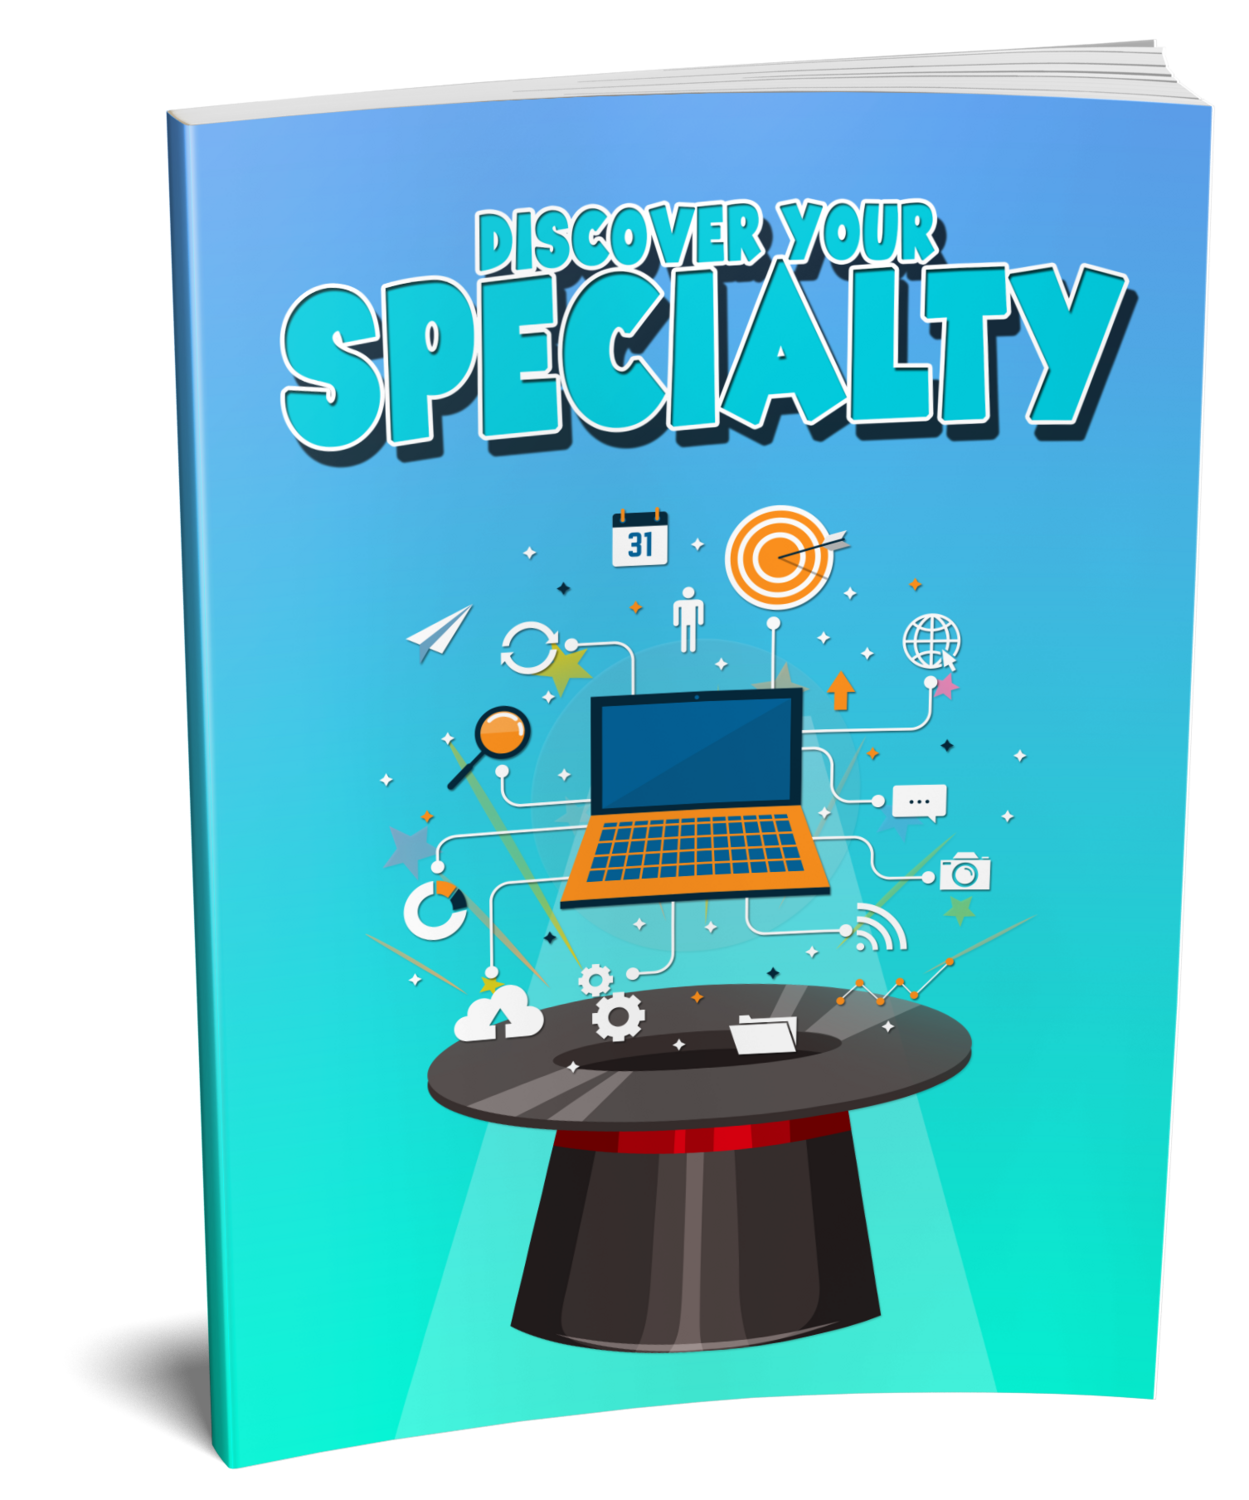 Discover Your Specialty